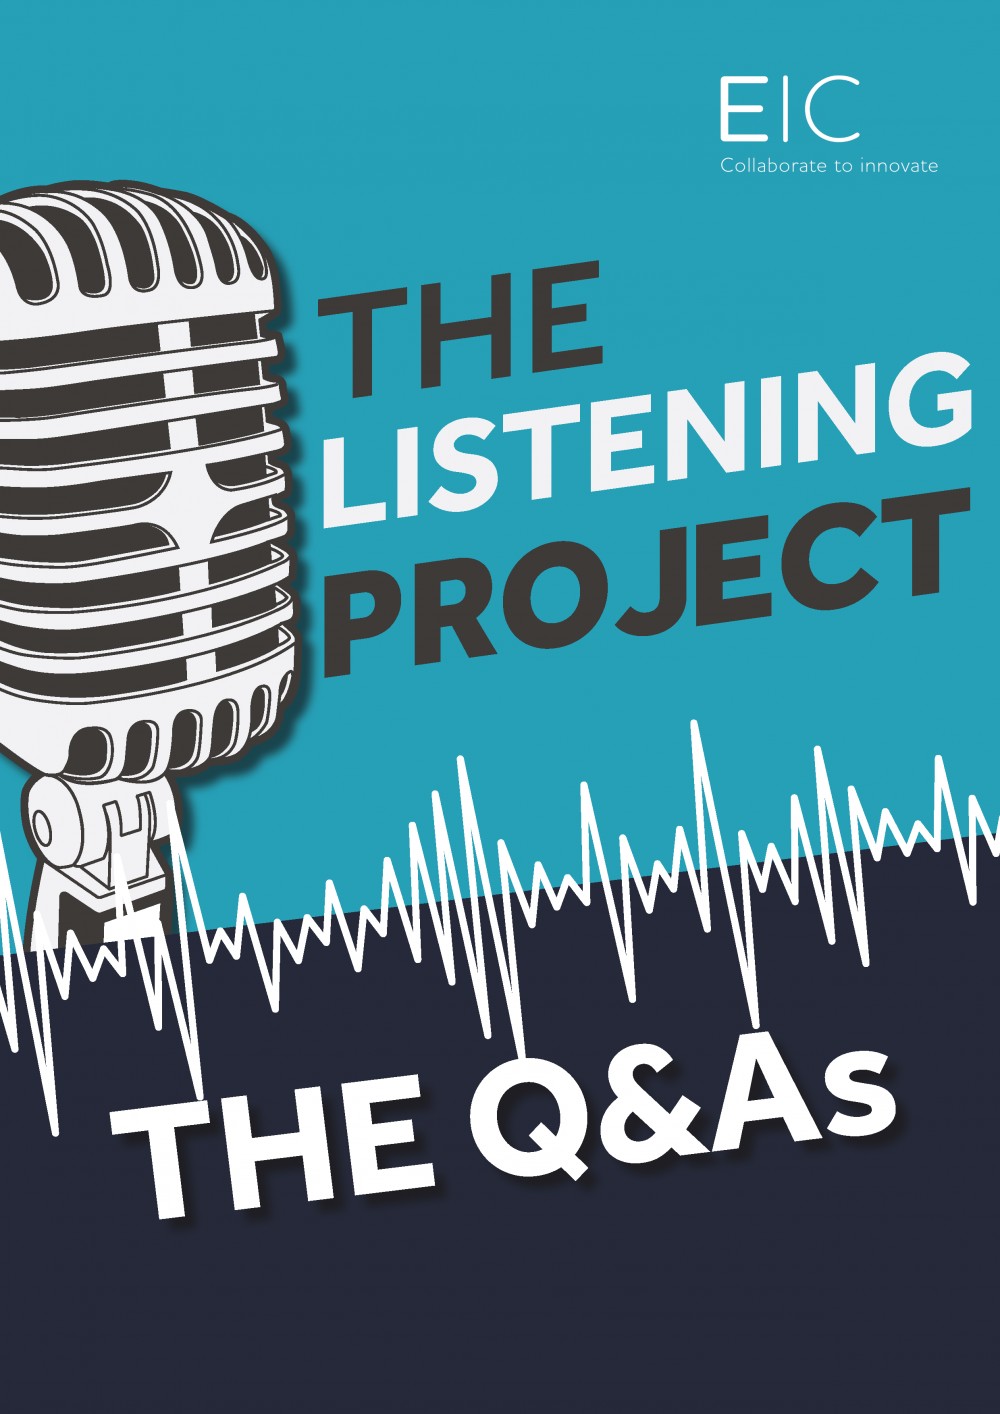 The EIC Listening Project: The Q&As